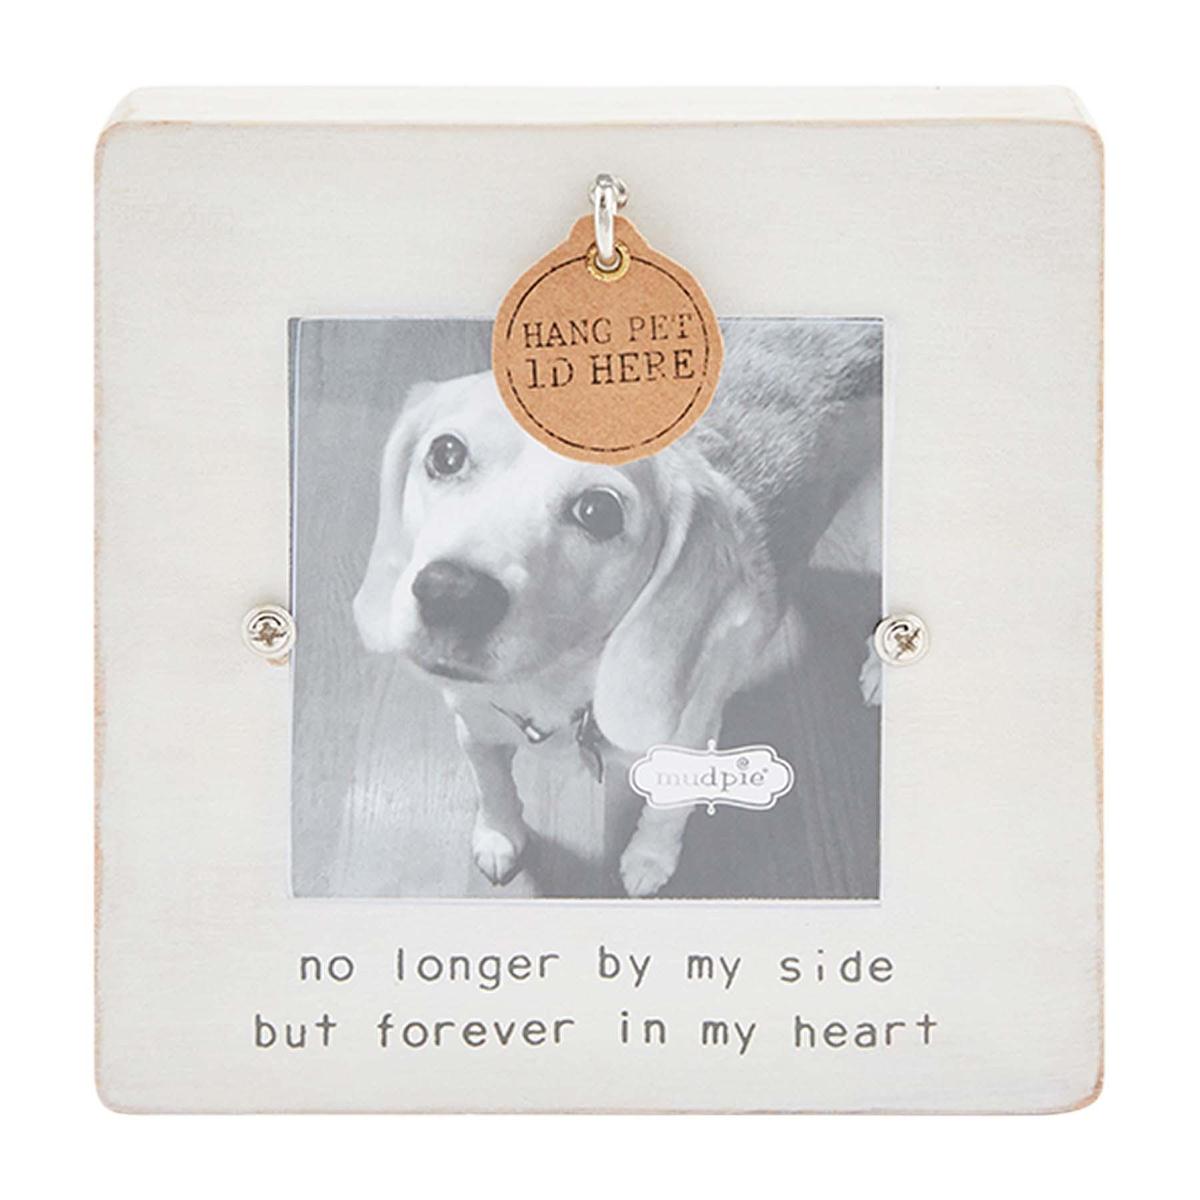 white wooden pet frame with text "no longer by my side but forever in my heart" printed on it.